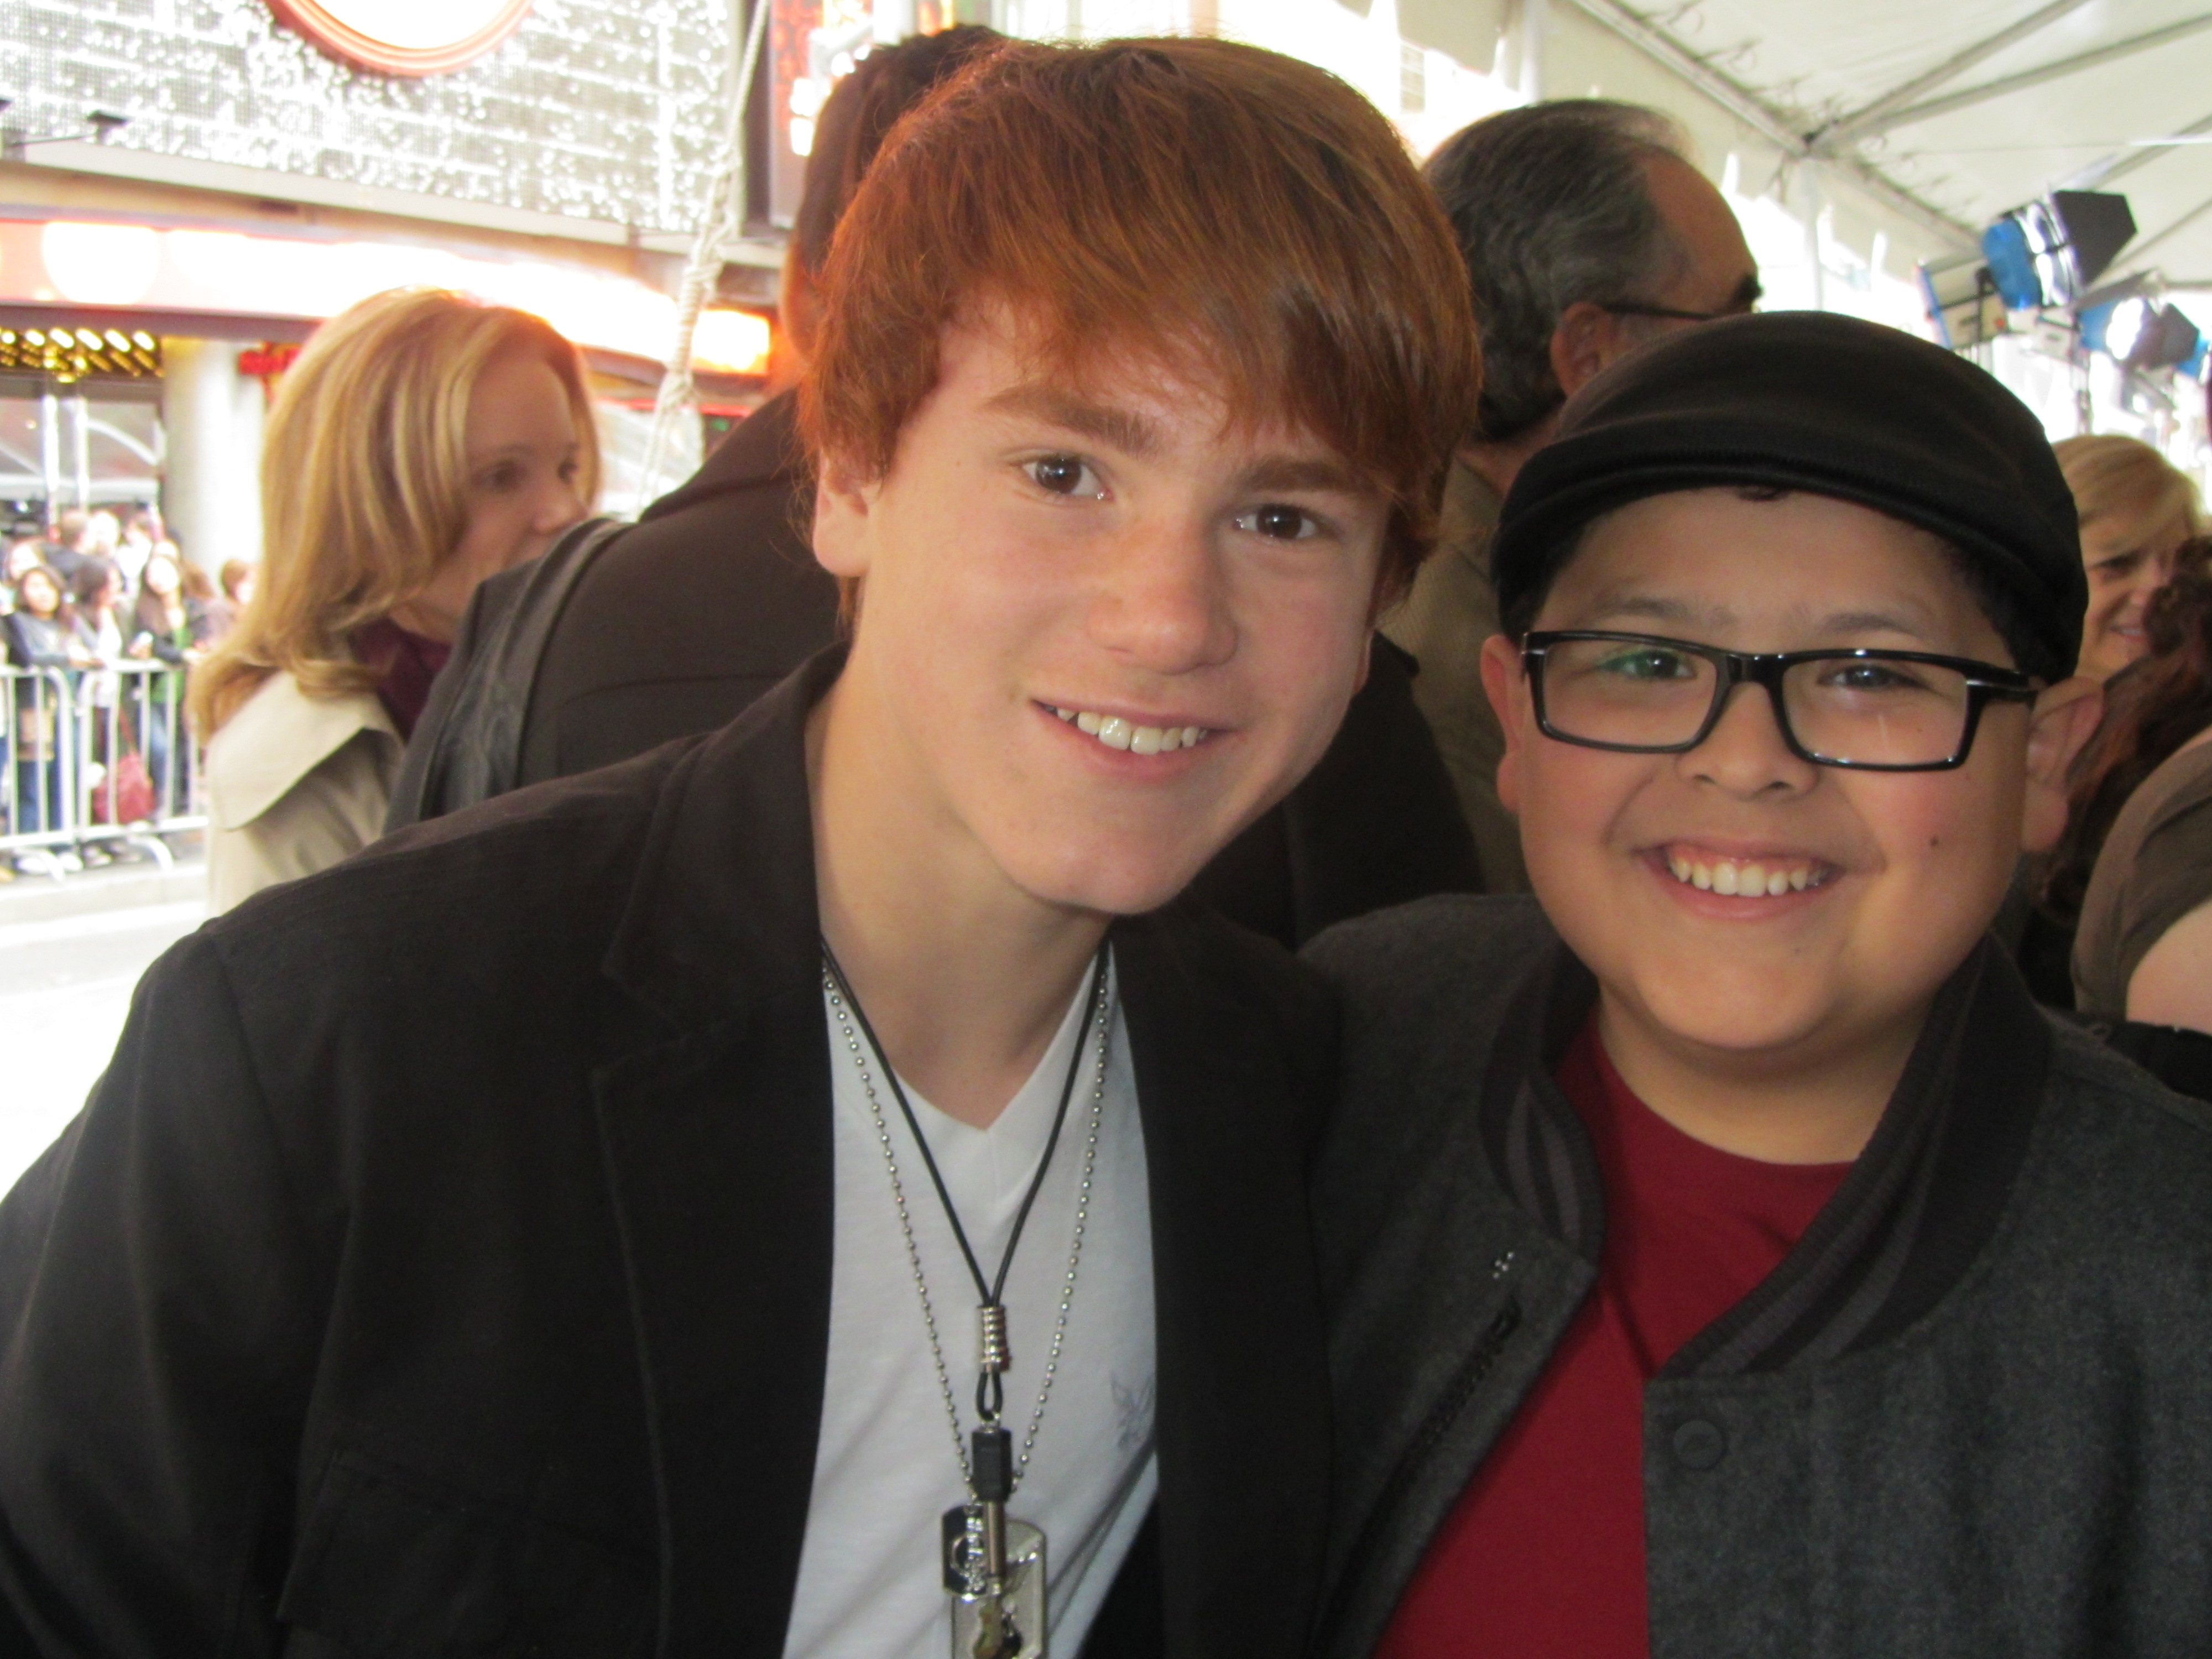 Justin Tinucci with Rico Rodriguez at the premiere of The Muppets November 12 2011 at the El Capitan Theatre, Hollywood.